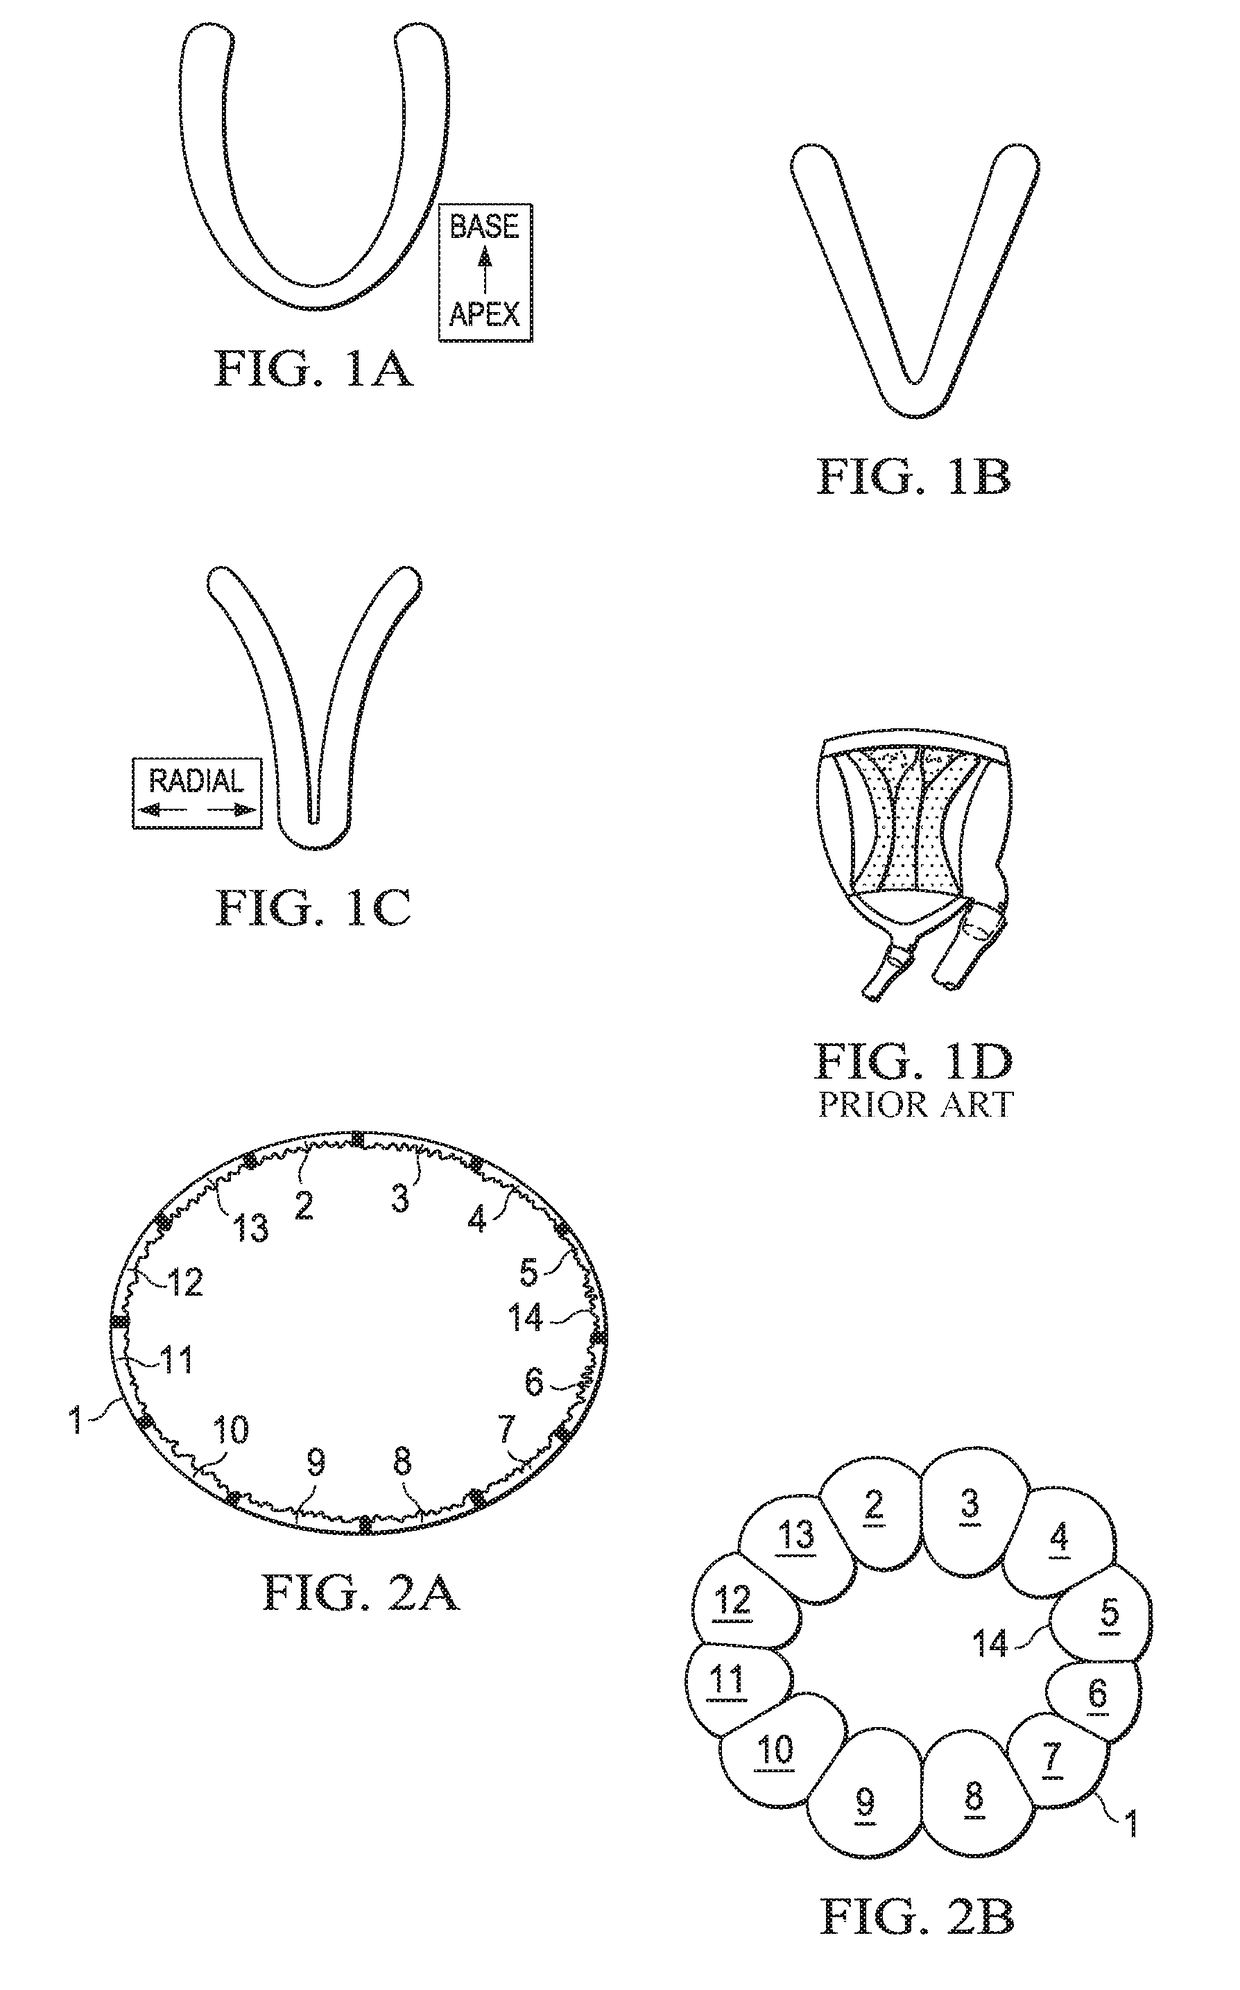 Fully implantable direct cardiac and aortic compression device